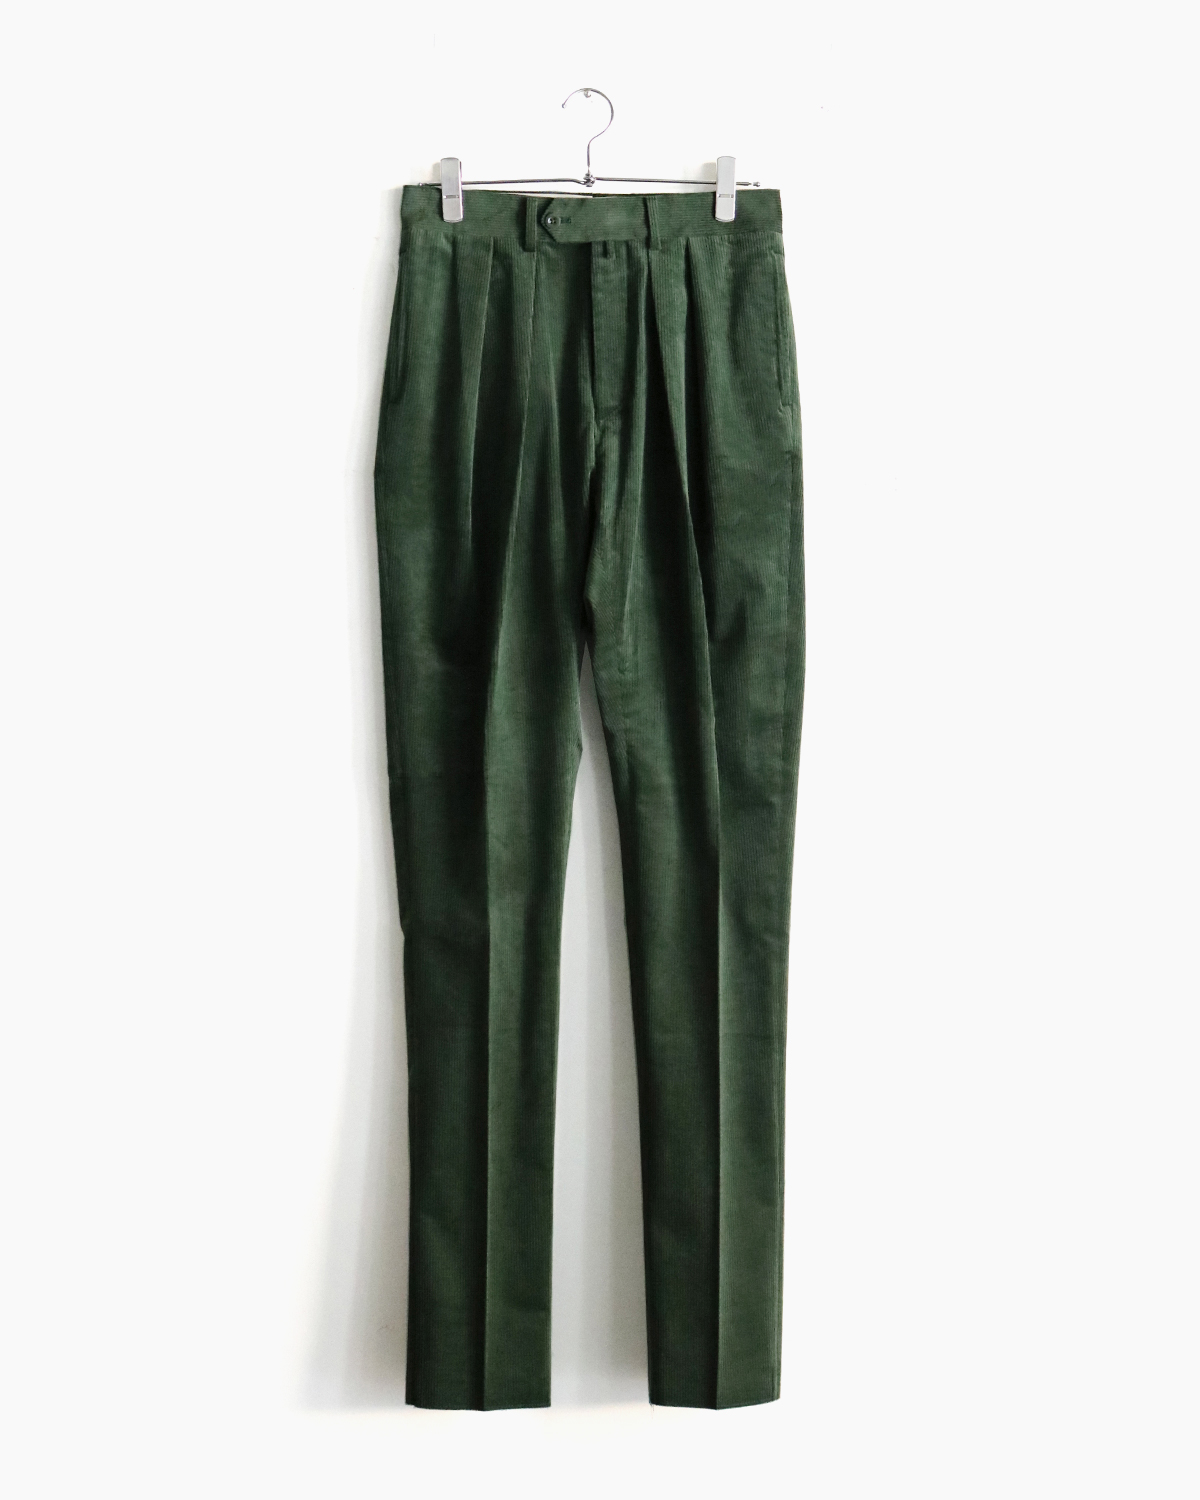 FRENCH CORDUROY｜TAPERED - Green｜NEAT